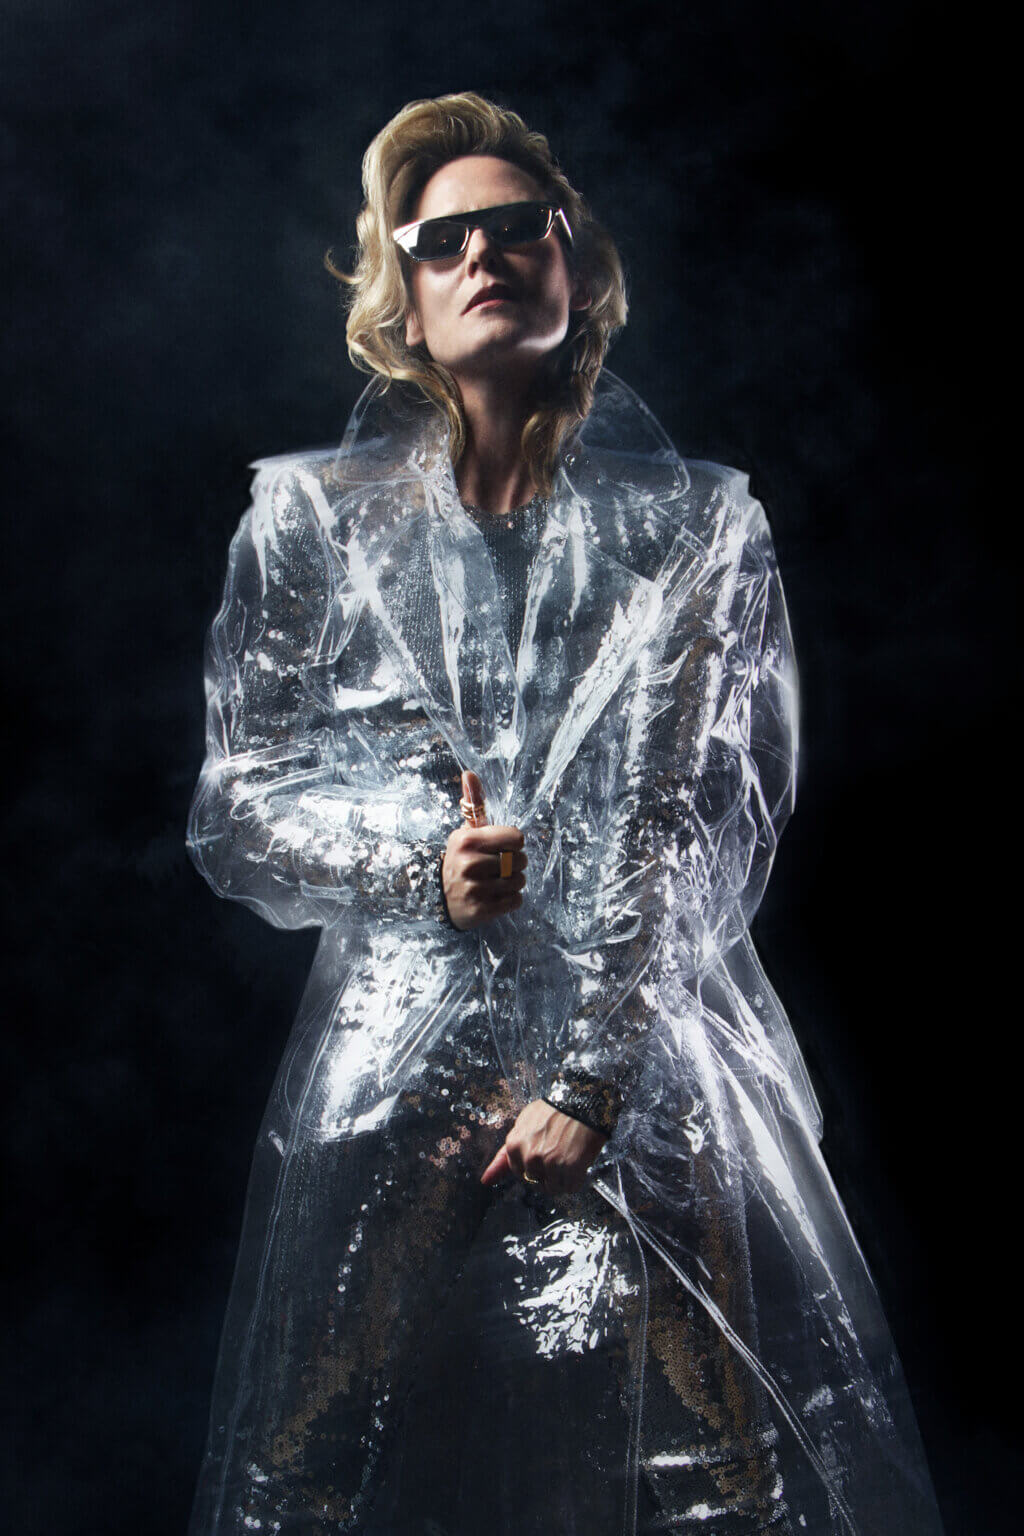 Róisín Murphy Shares PAYFONE and Eli Escobar Remixes of "You Knew". Both tracks arrive ahead of her forthcoming album Hit Parade